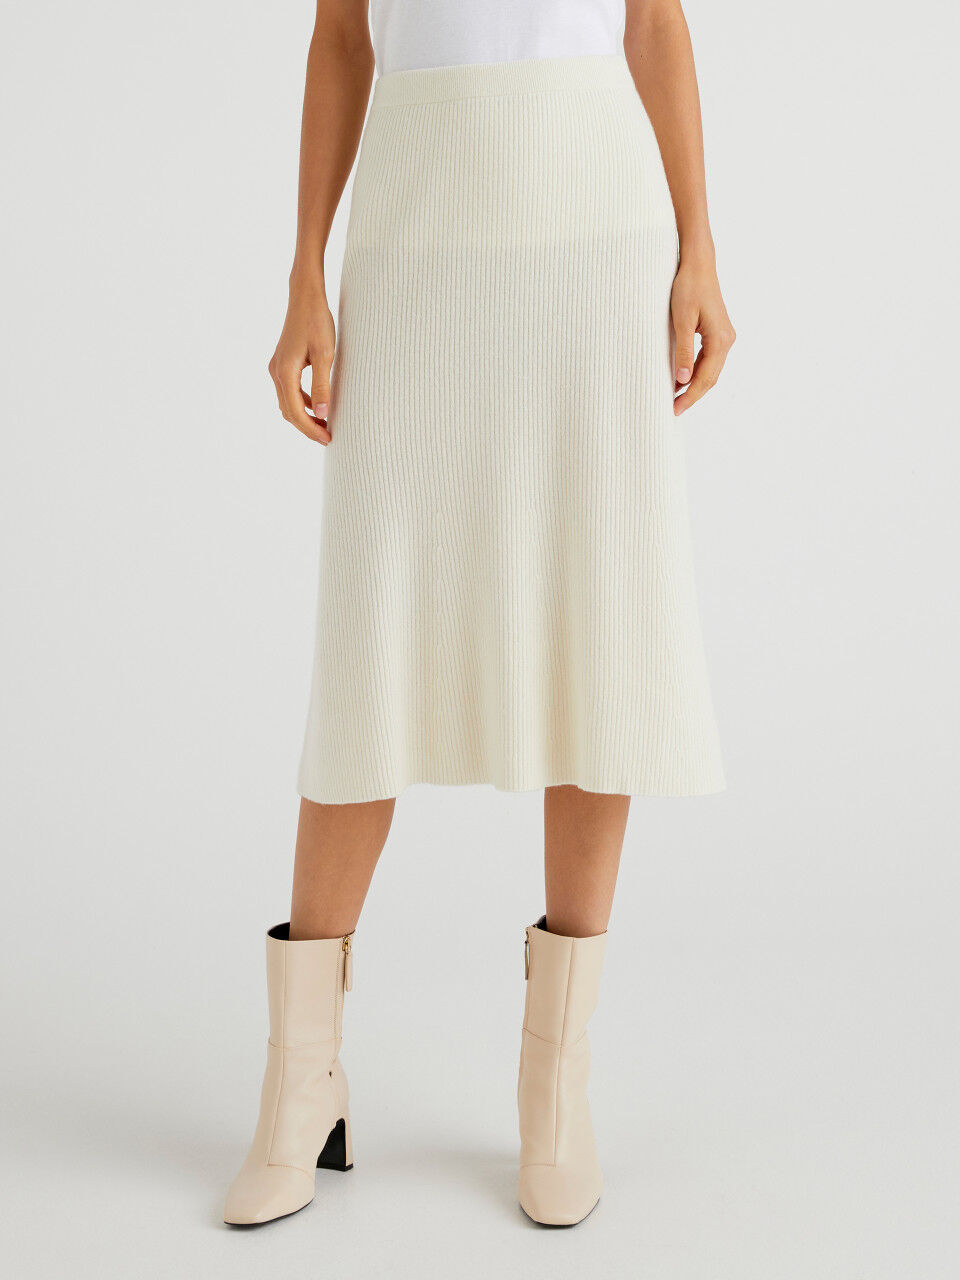 United Colors of Benetton Asymmetry Skirt white casual look Fashion Skirts Asymmetry Skirts 